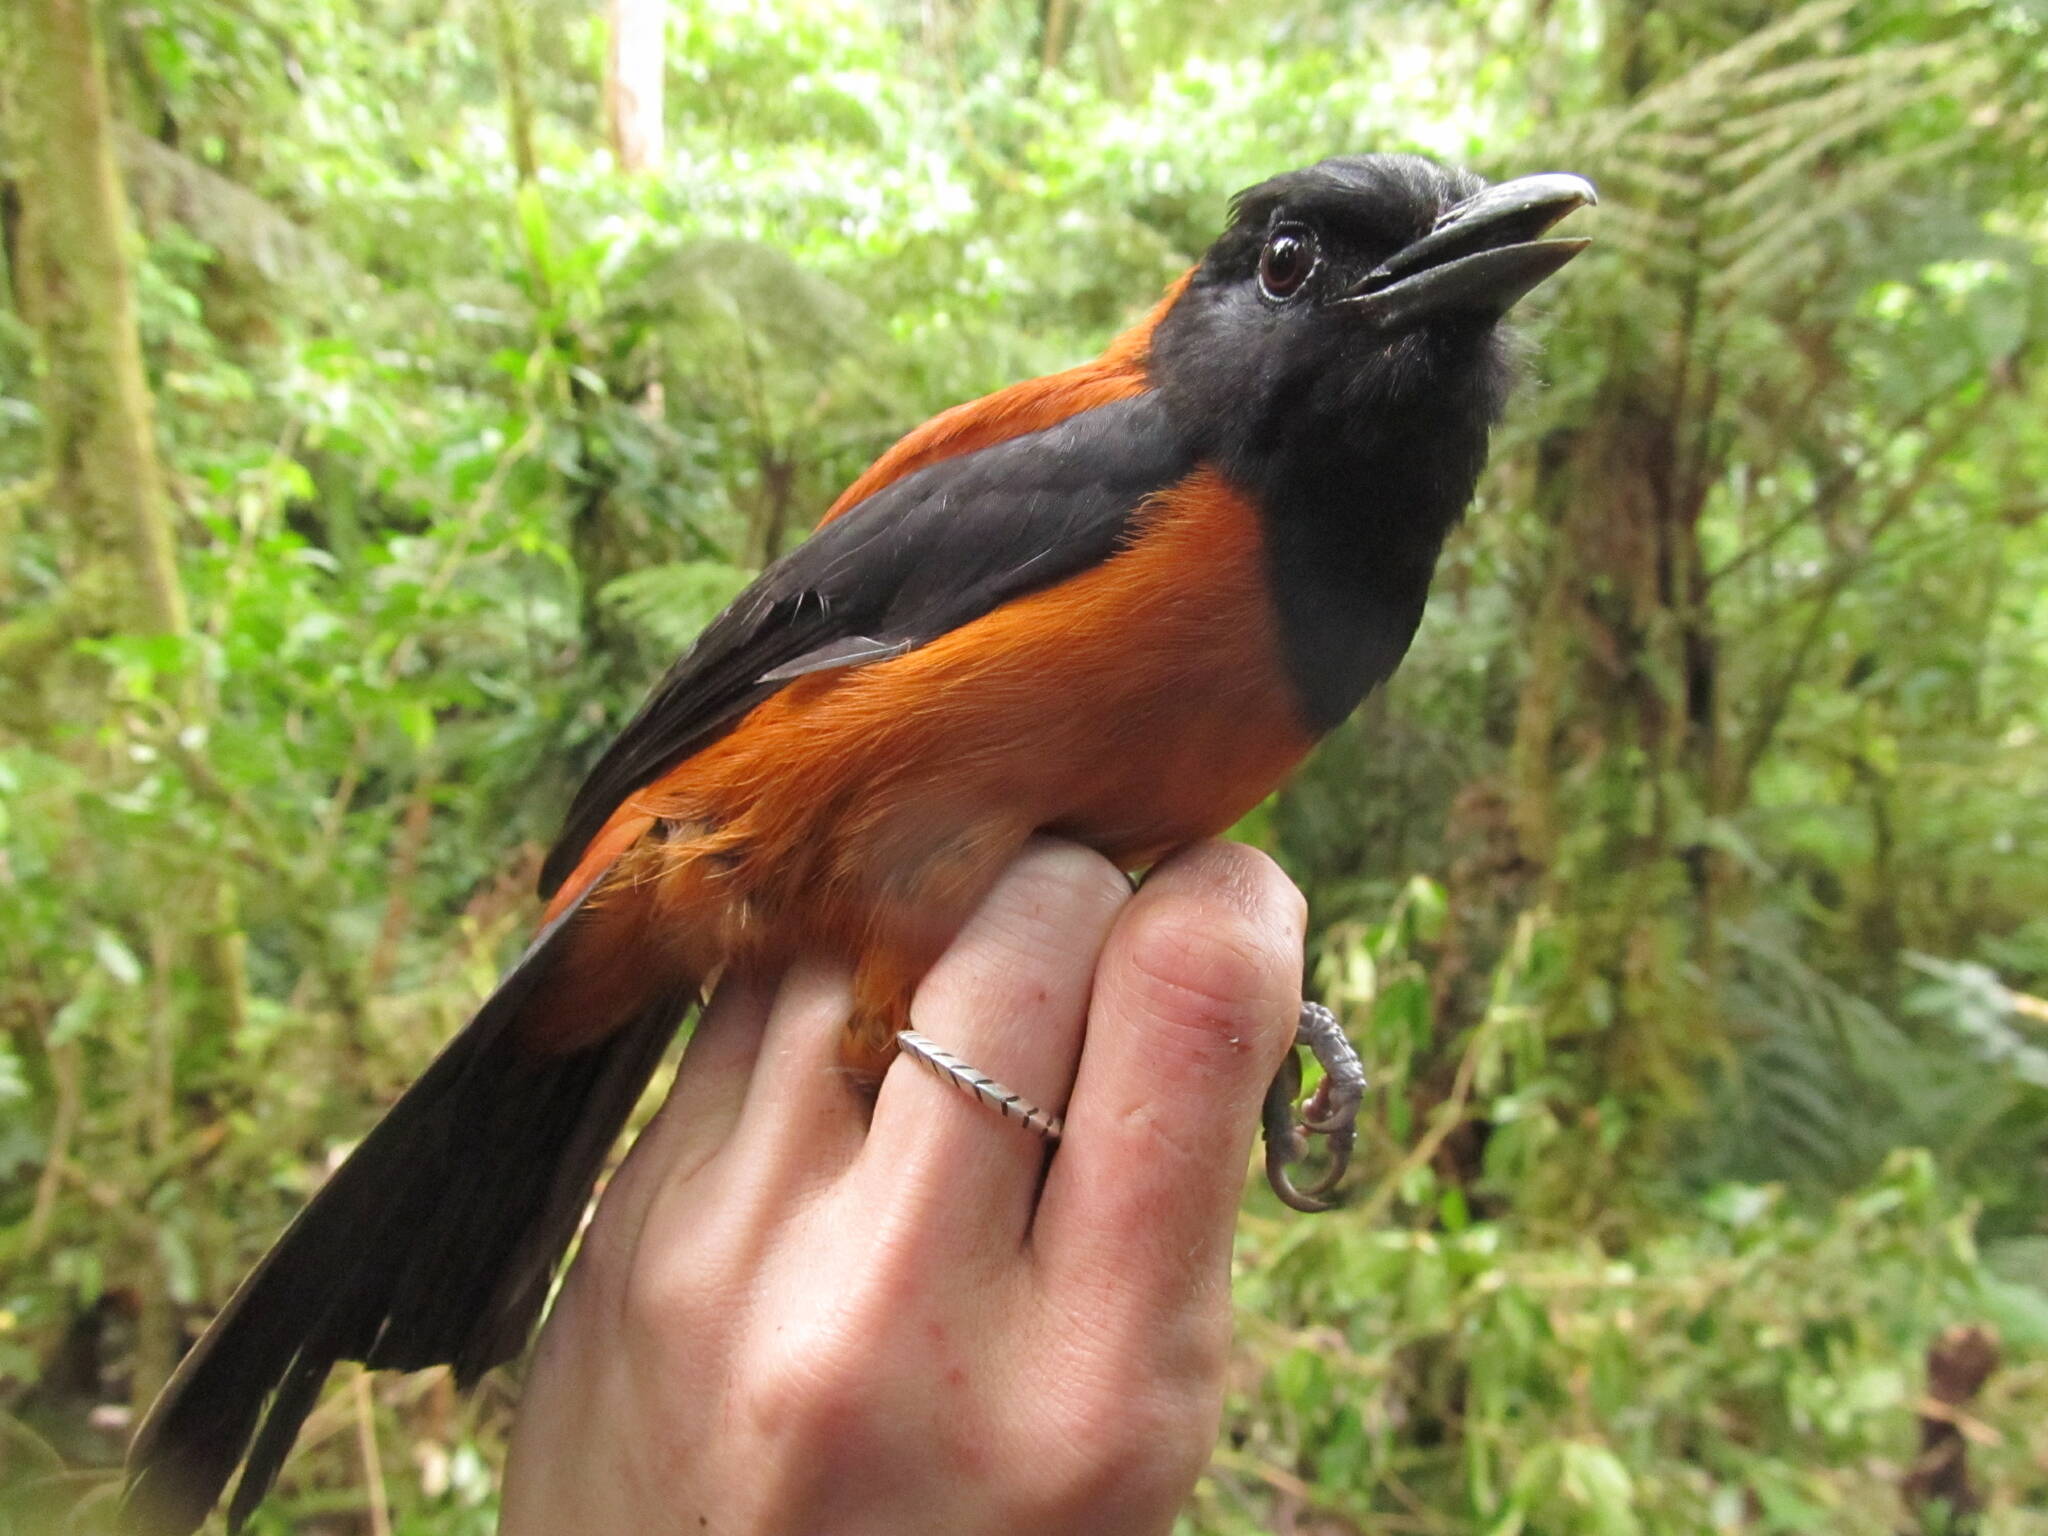 This photo available under a Creative Commons license shows a hooded pitohui (Pitohui dichrous) YUS Conservation area on the Huon Peninsula, Morobe Province, Papua New Guinea. They are among the most well-known examples of a toxic birds. (Courtesy Photo / Wikimedia)